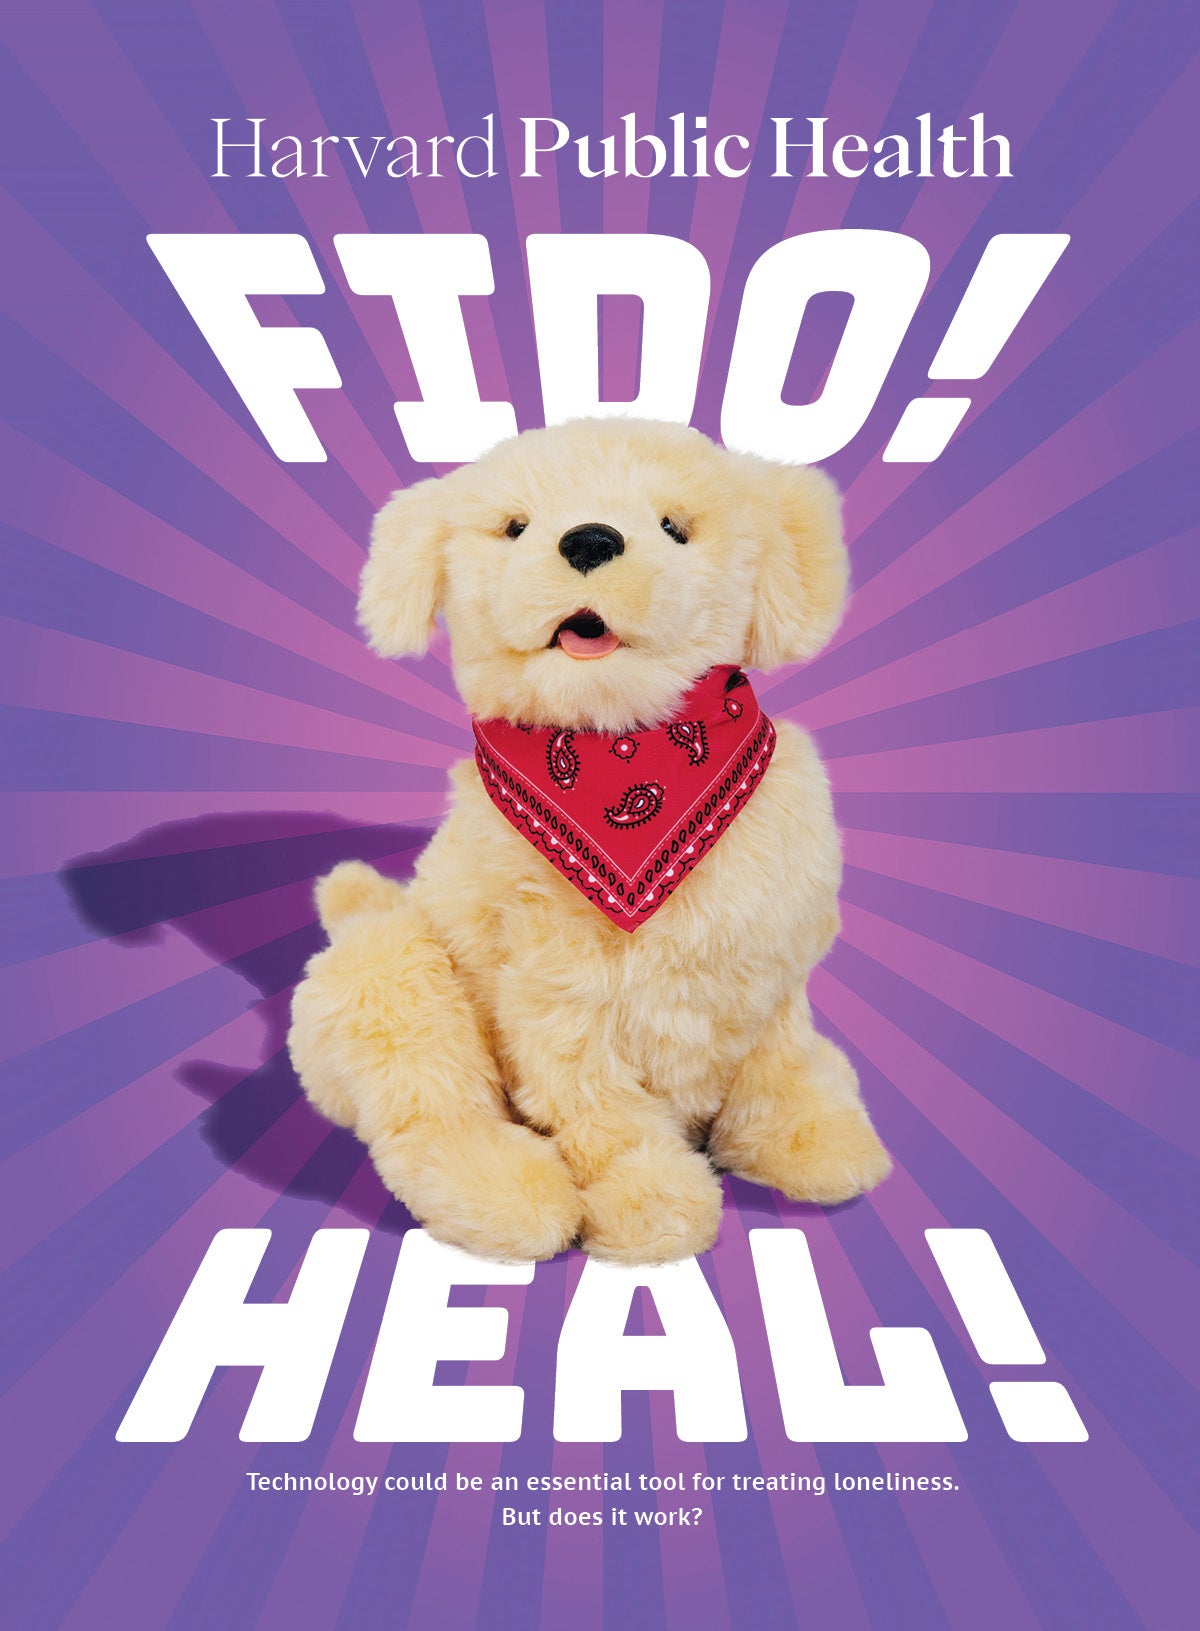 Harvard Public Health magazine cover: A blond stuffed dog with a red bandana is placed in front of a bright purple and pink sunburst background. The words “Fido! Heal!” extend above and below the animal. Sub-title reads: Technology be an essential tool for treating loneliness. But does it work?